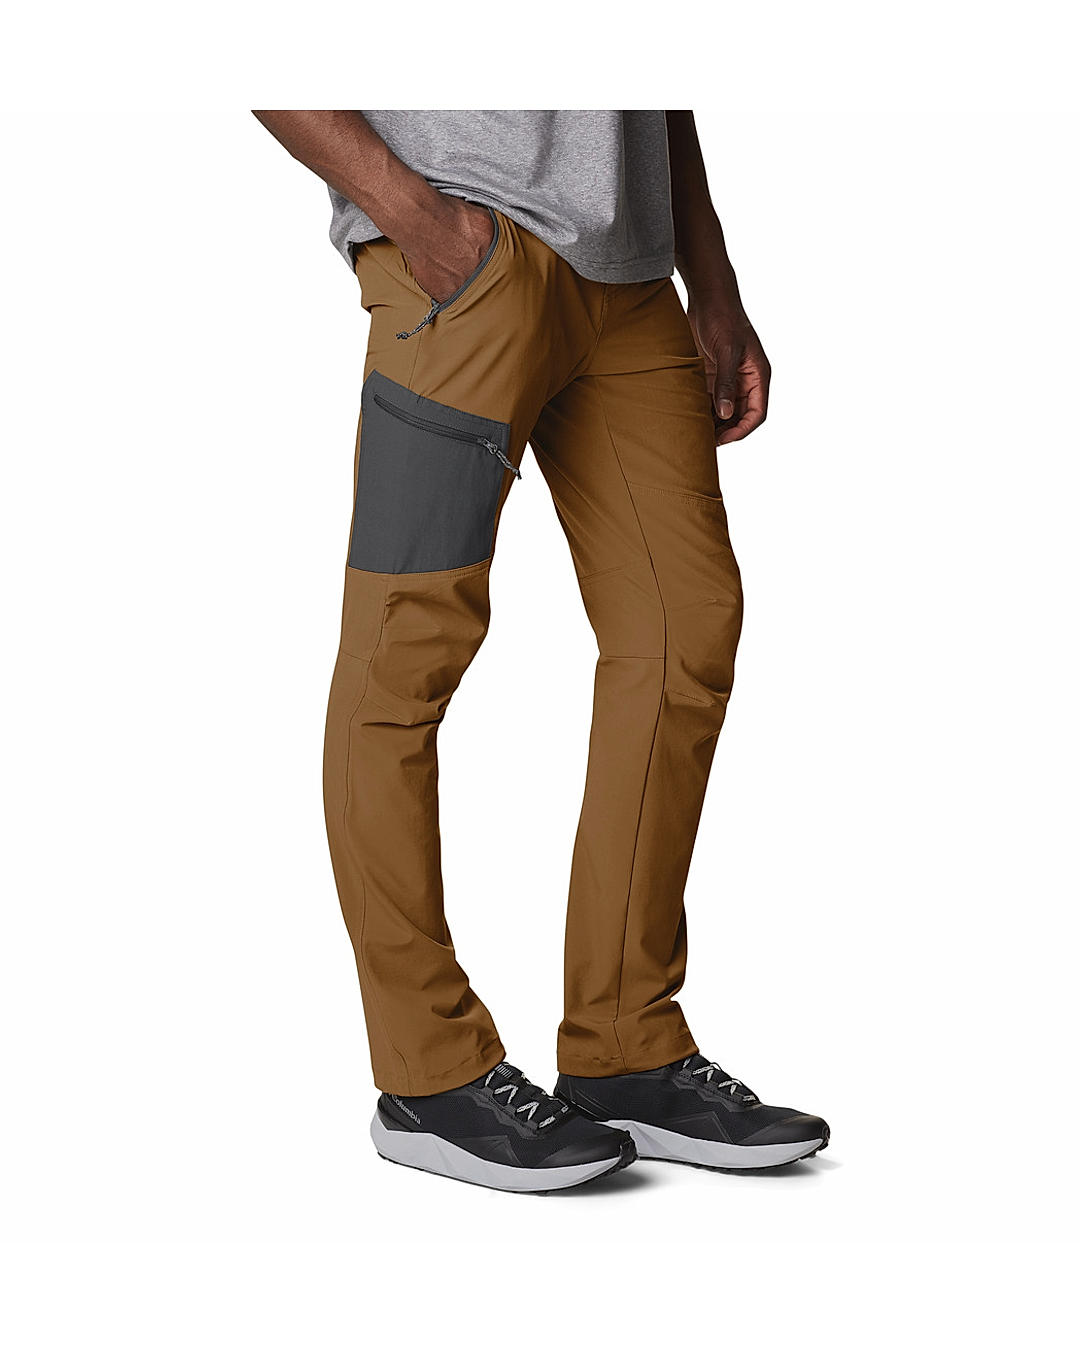 Buy Triple Canyon Pant for Men and Women Online at Columbia